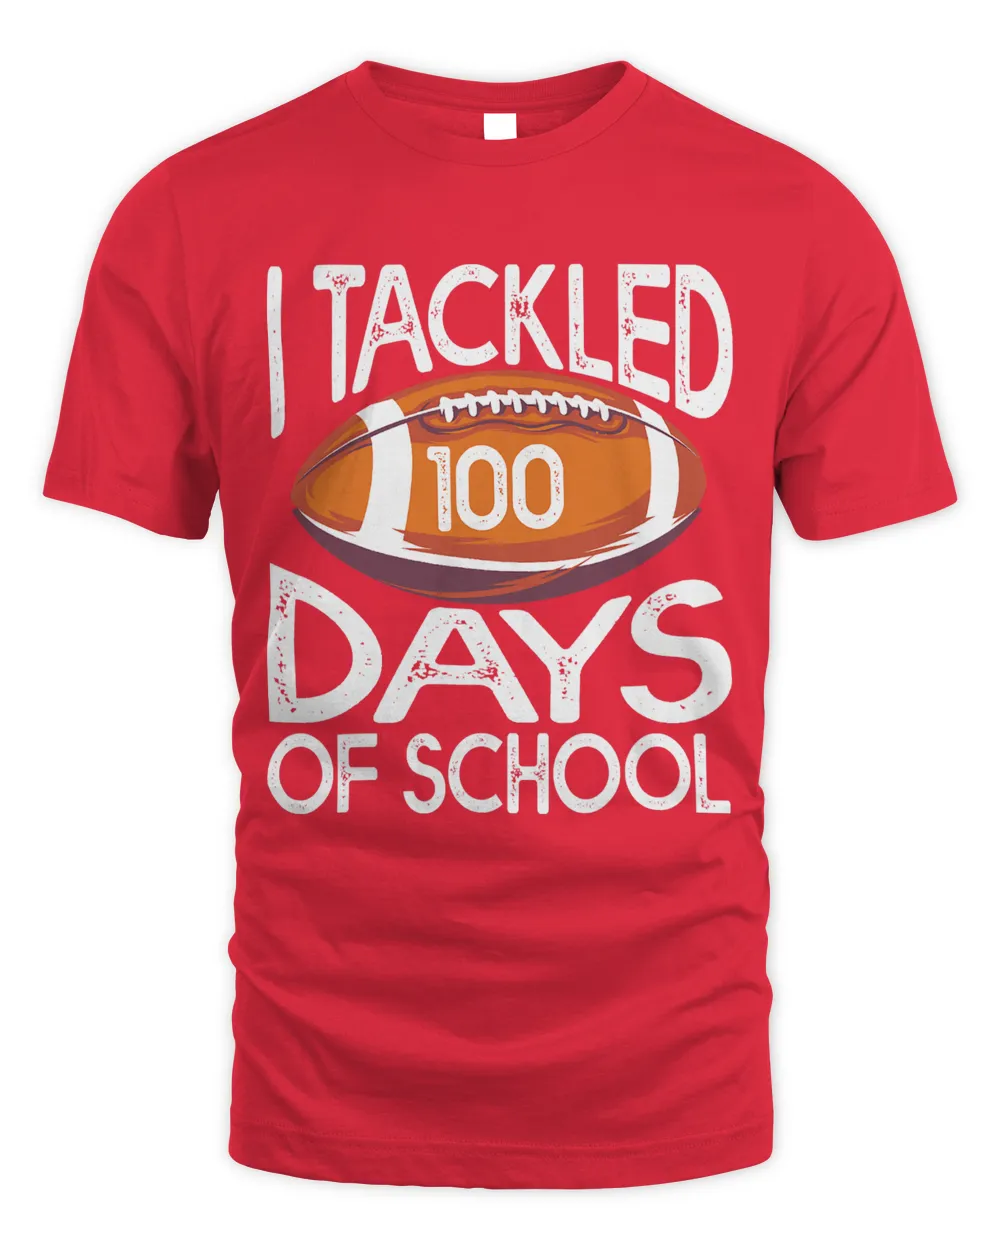 I TACKLEDDAYS OF SCHOOL Football th Day Gifts